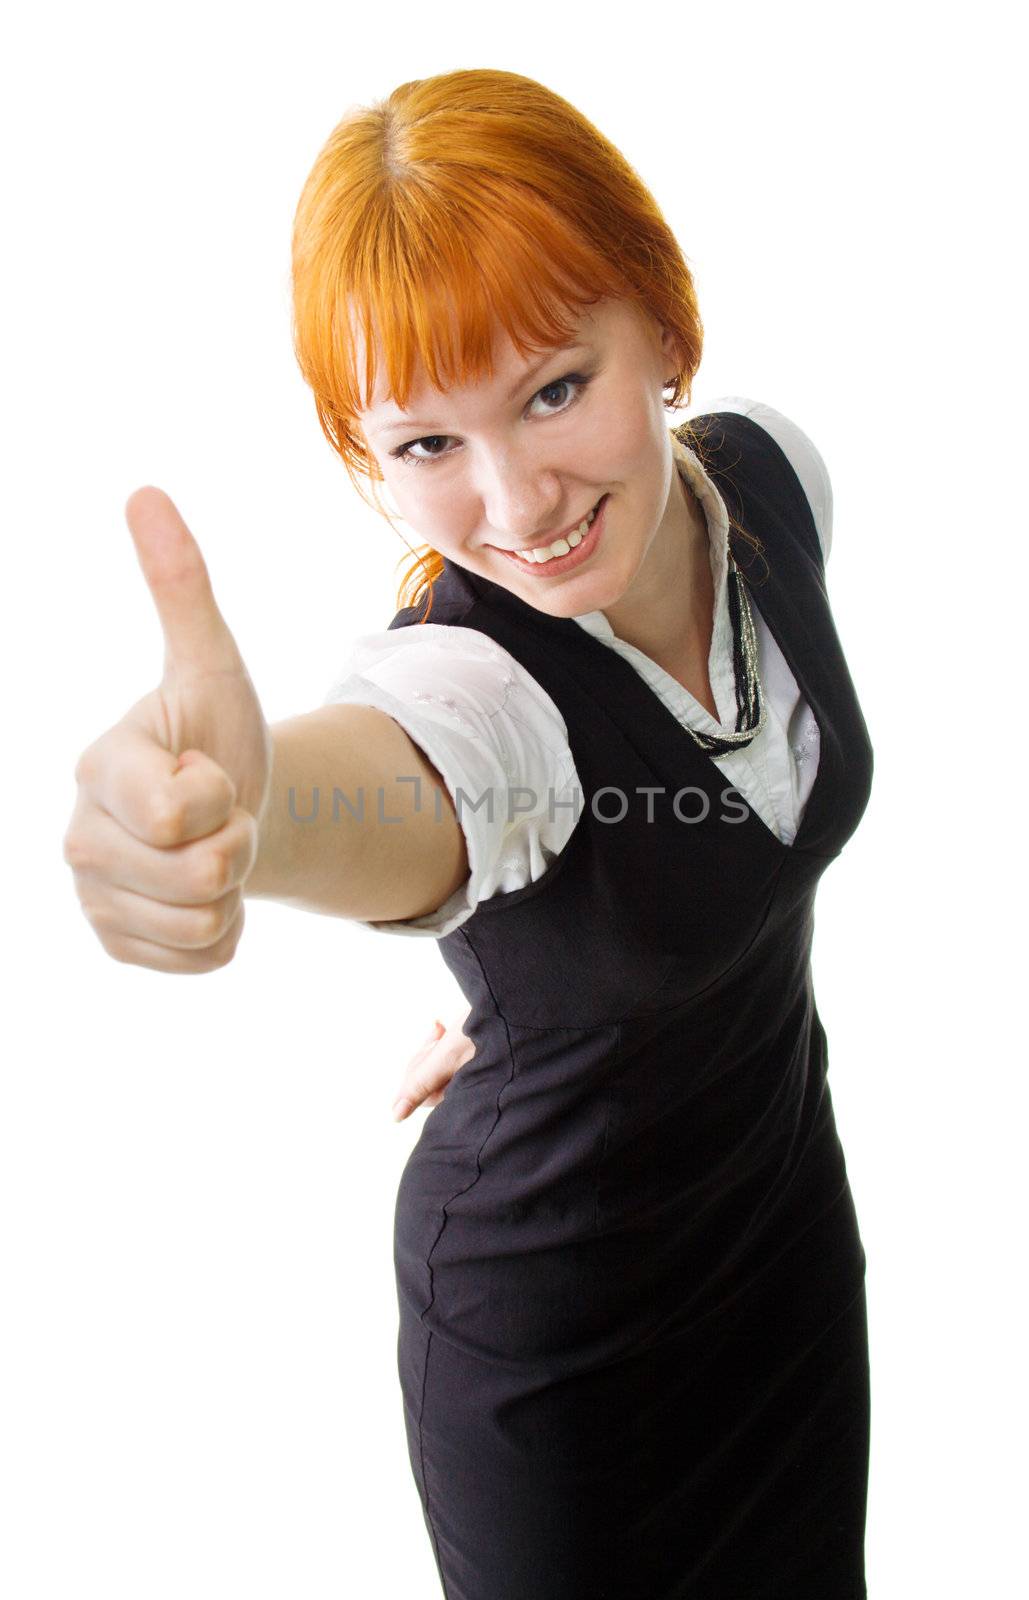 Young businesswoman showing 'thumbs up' sign